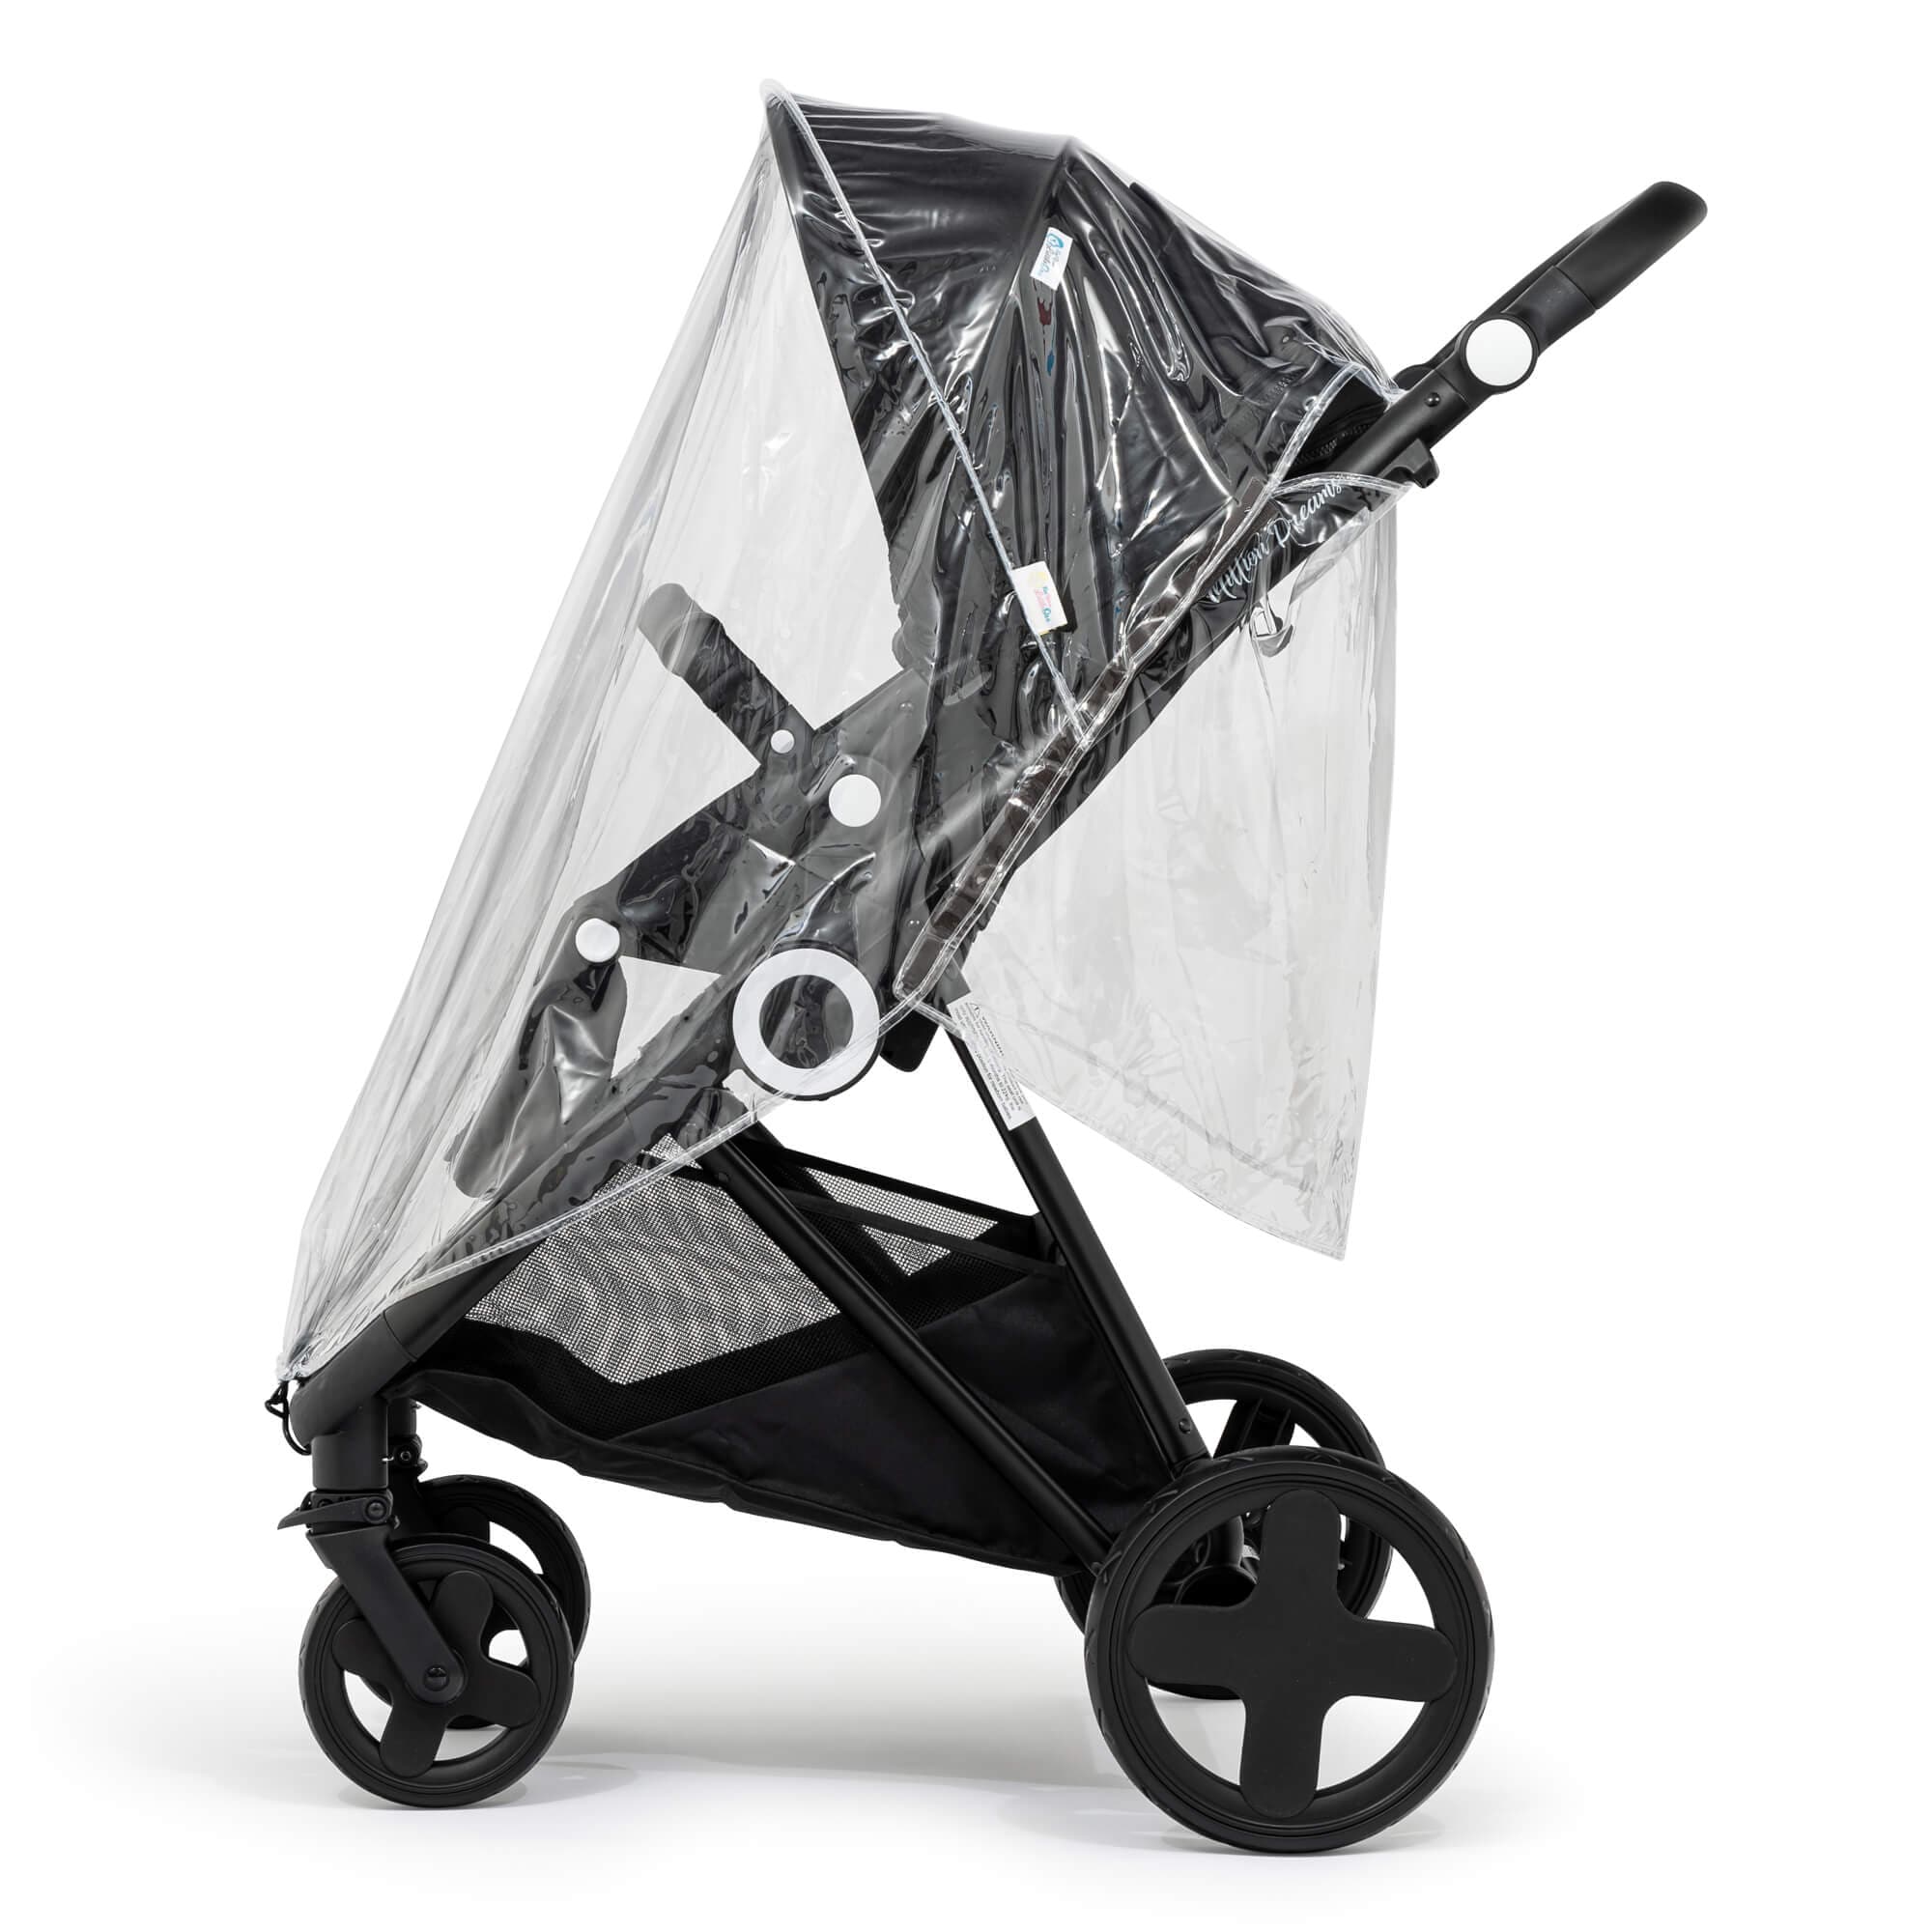 Pushchair Raincover Compatible With Kiddicare - For Your Little One